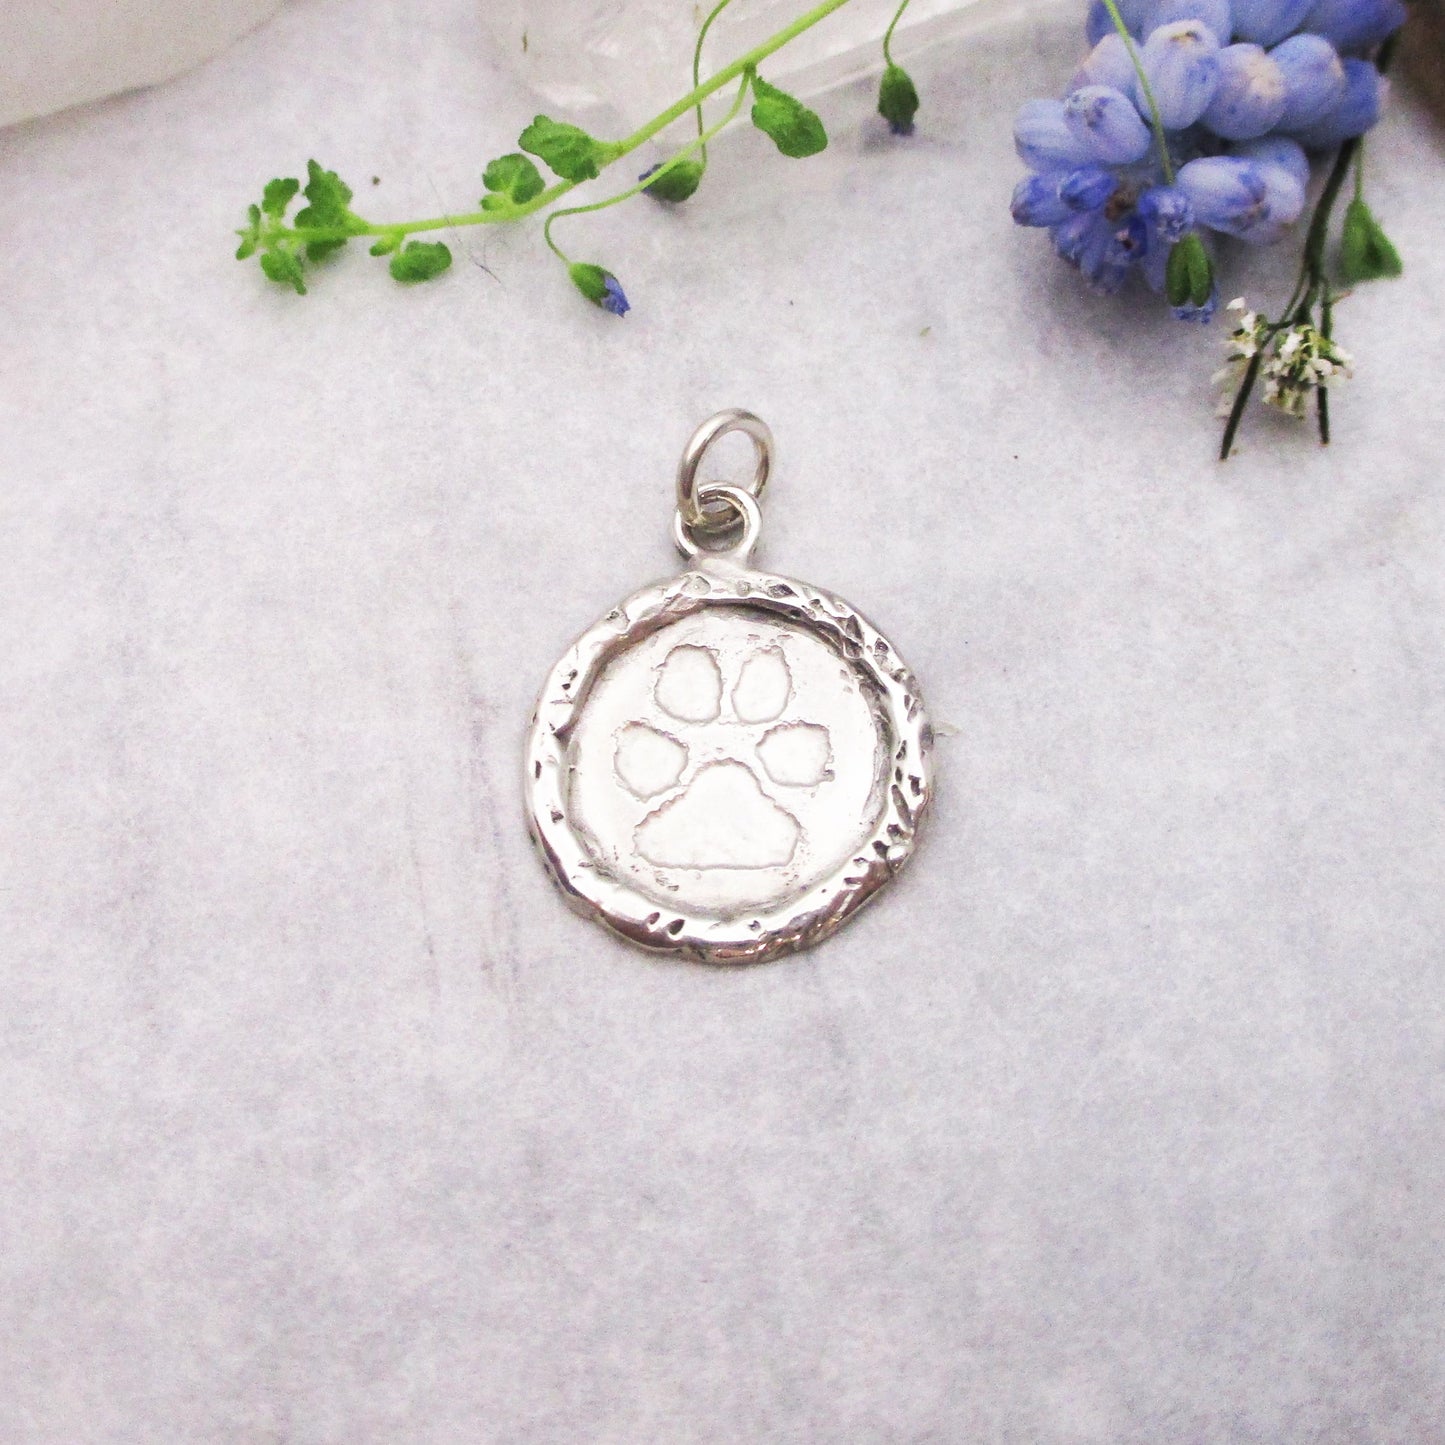 Load image into Gallery viewer, Small Framed Dog or Cat Paw Circle Pendant
